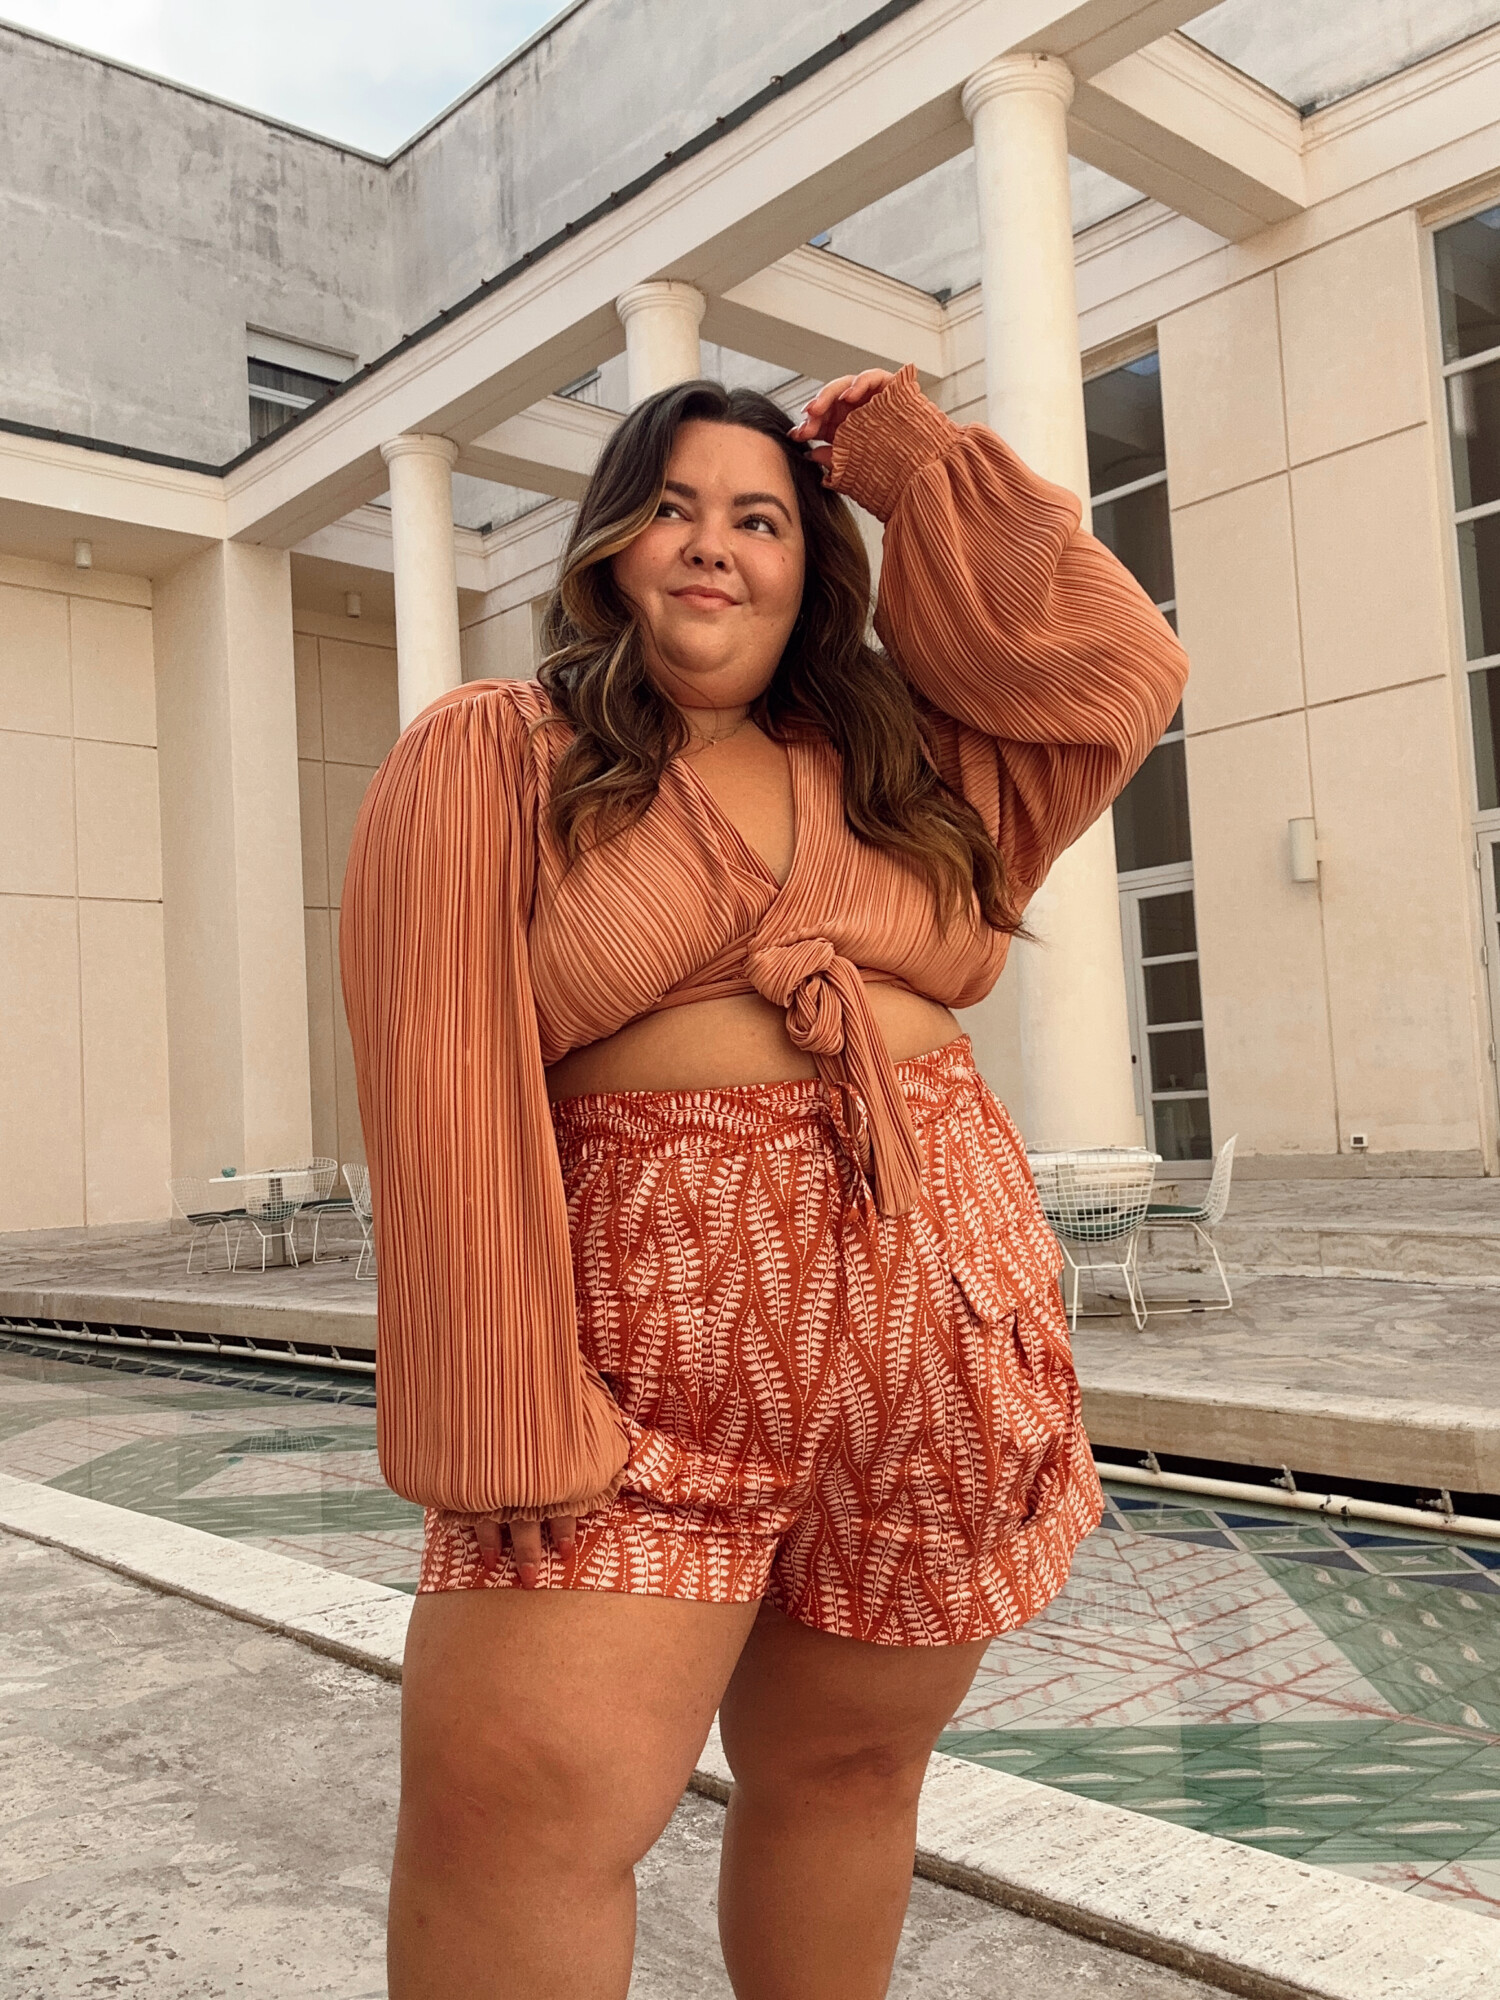 plus size fashion blogger Natalie in the City wears a plus size outfit from nuuly while on vacation in Italy.